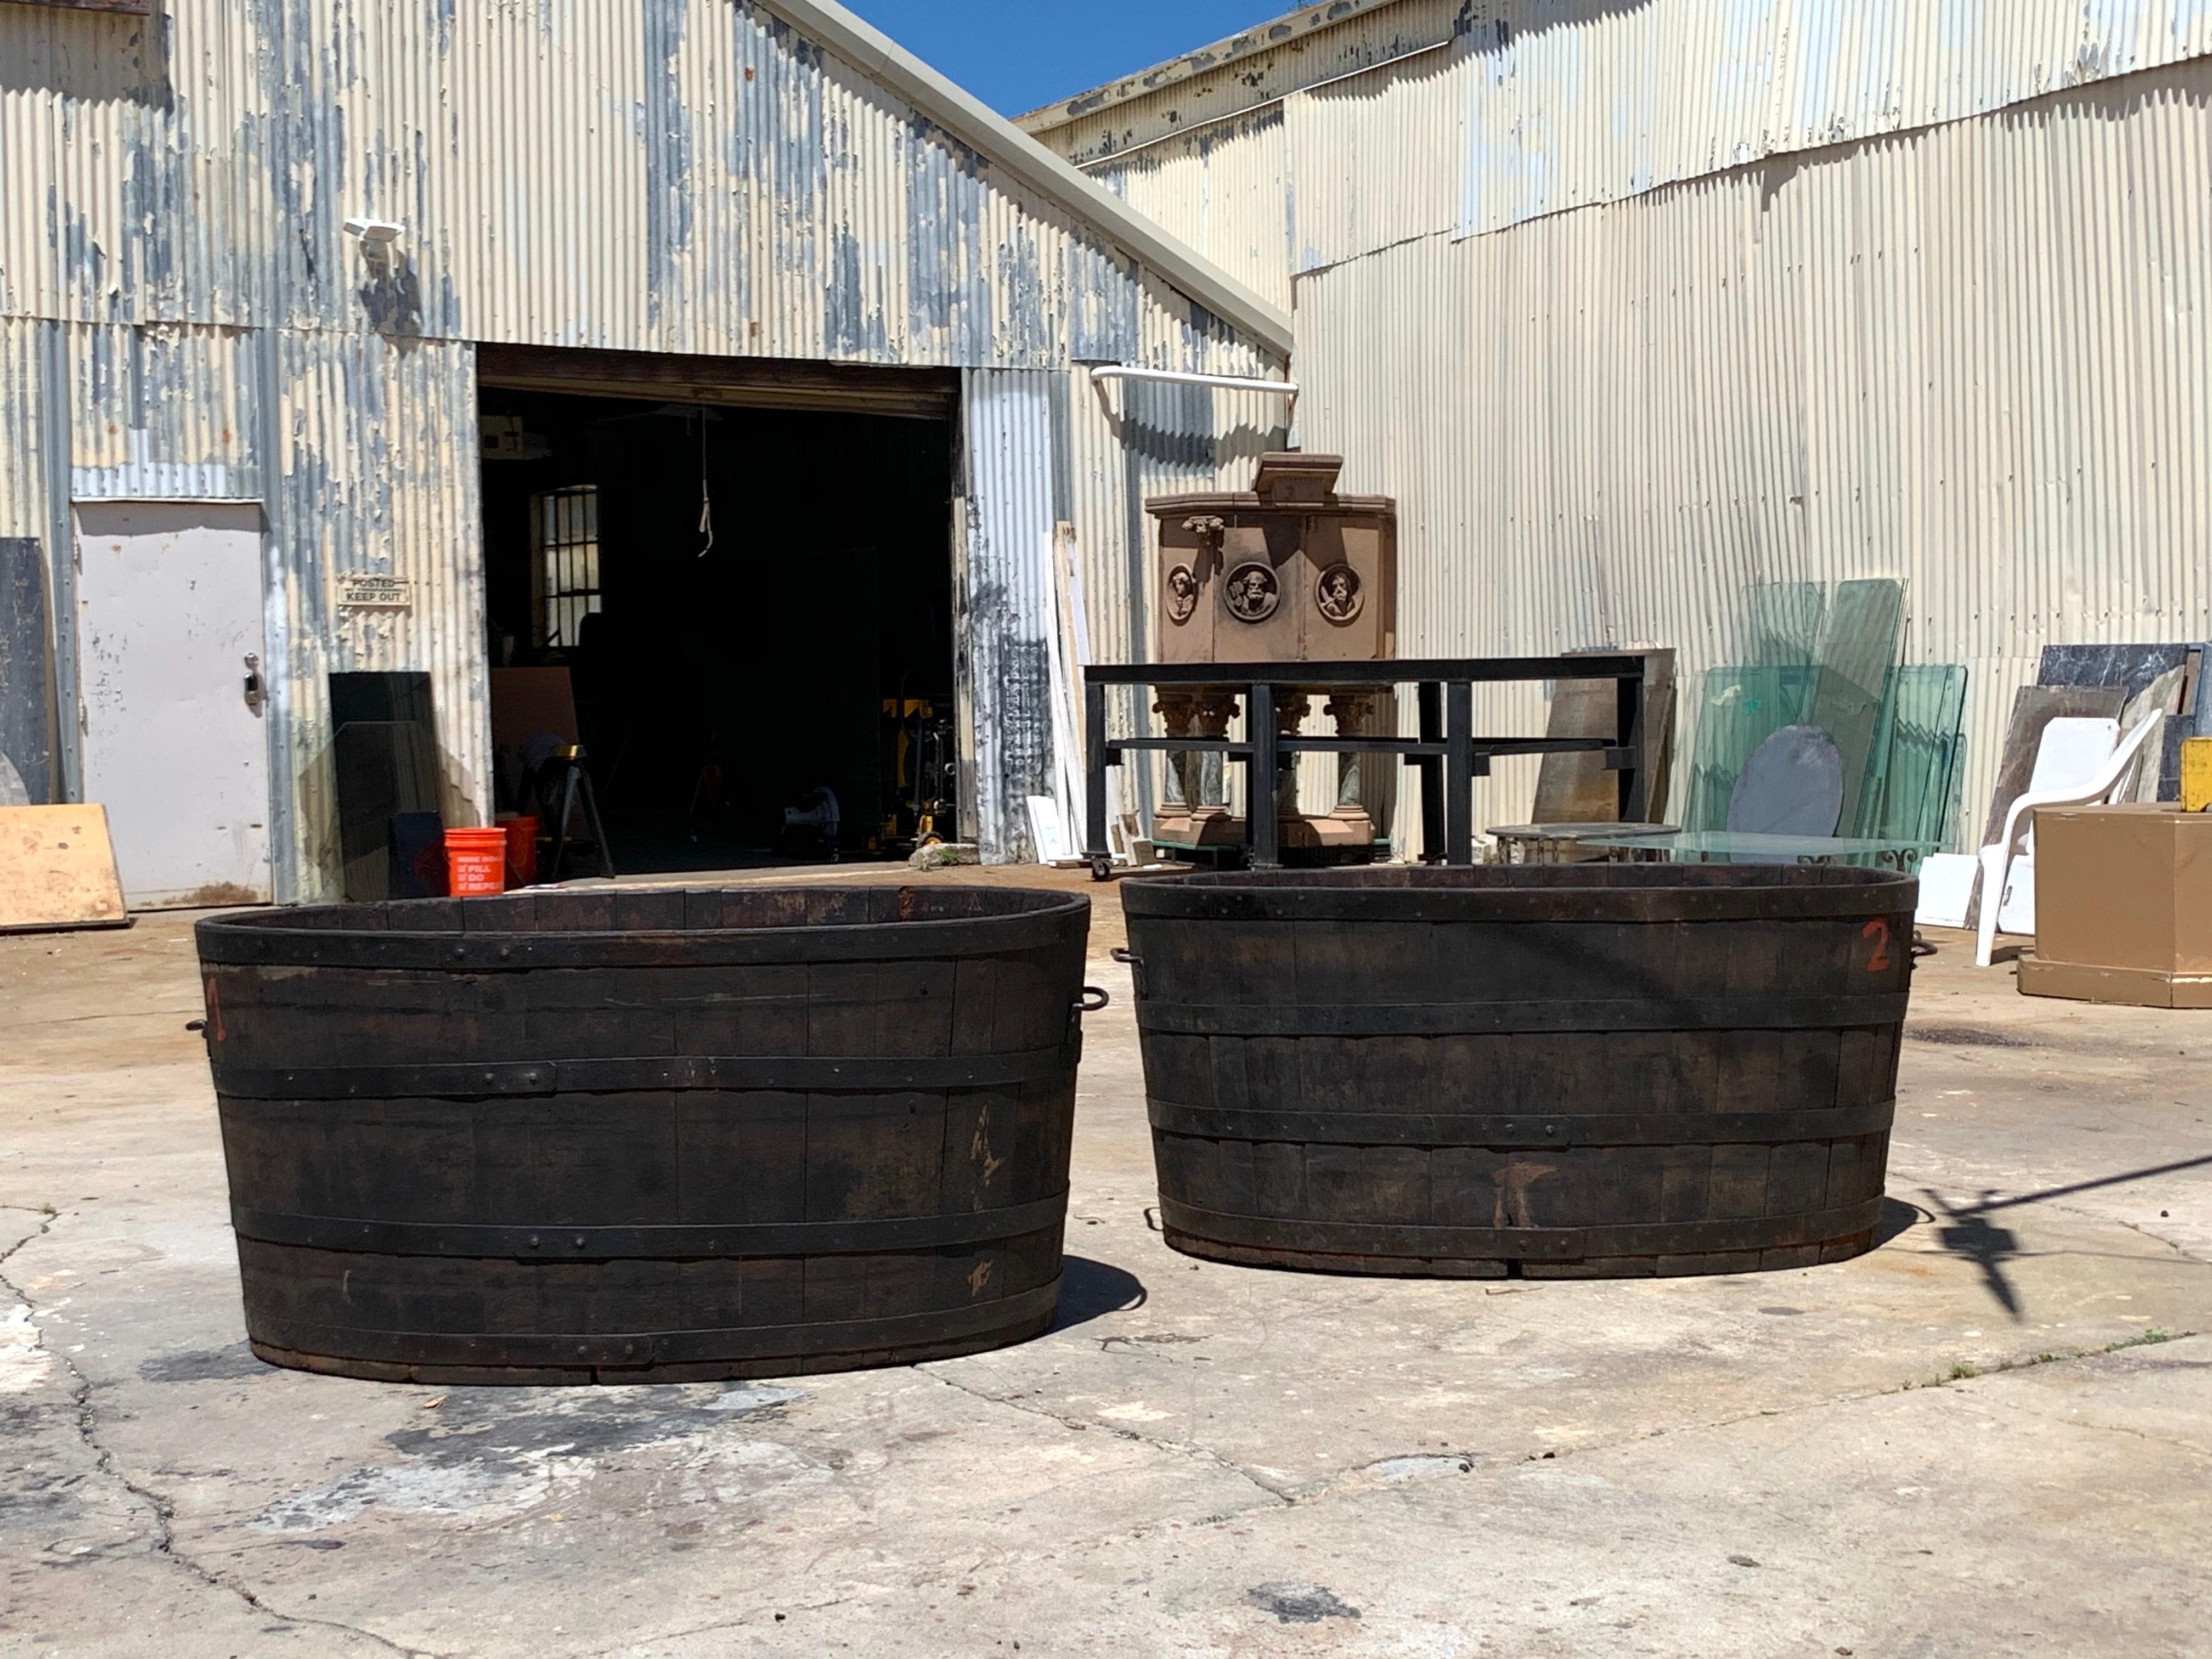 With vertical blanks and solid floors, these large buckets are reinforced with metal bands and have large iron handles; marked M.T. which we assume is a metric ton or roughly 2200 lbs. Measures: Interior height 27